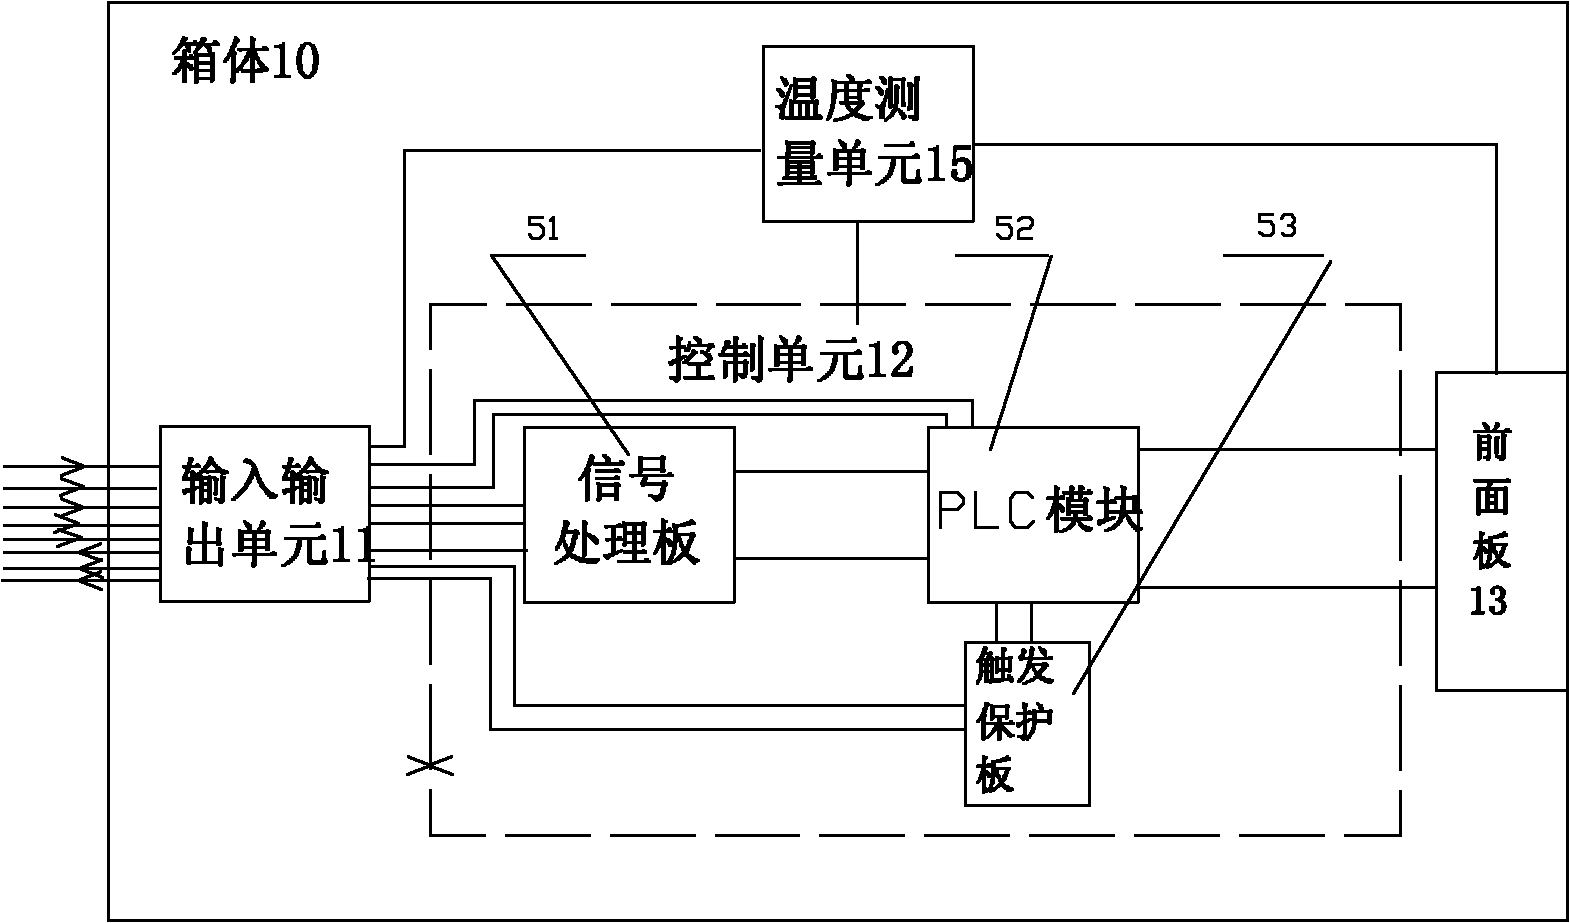 Testing system of gas insulated combined electric appliance equipment